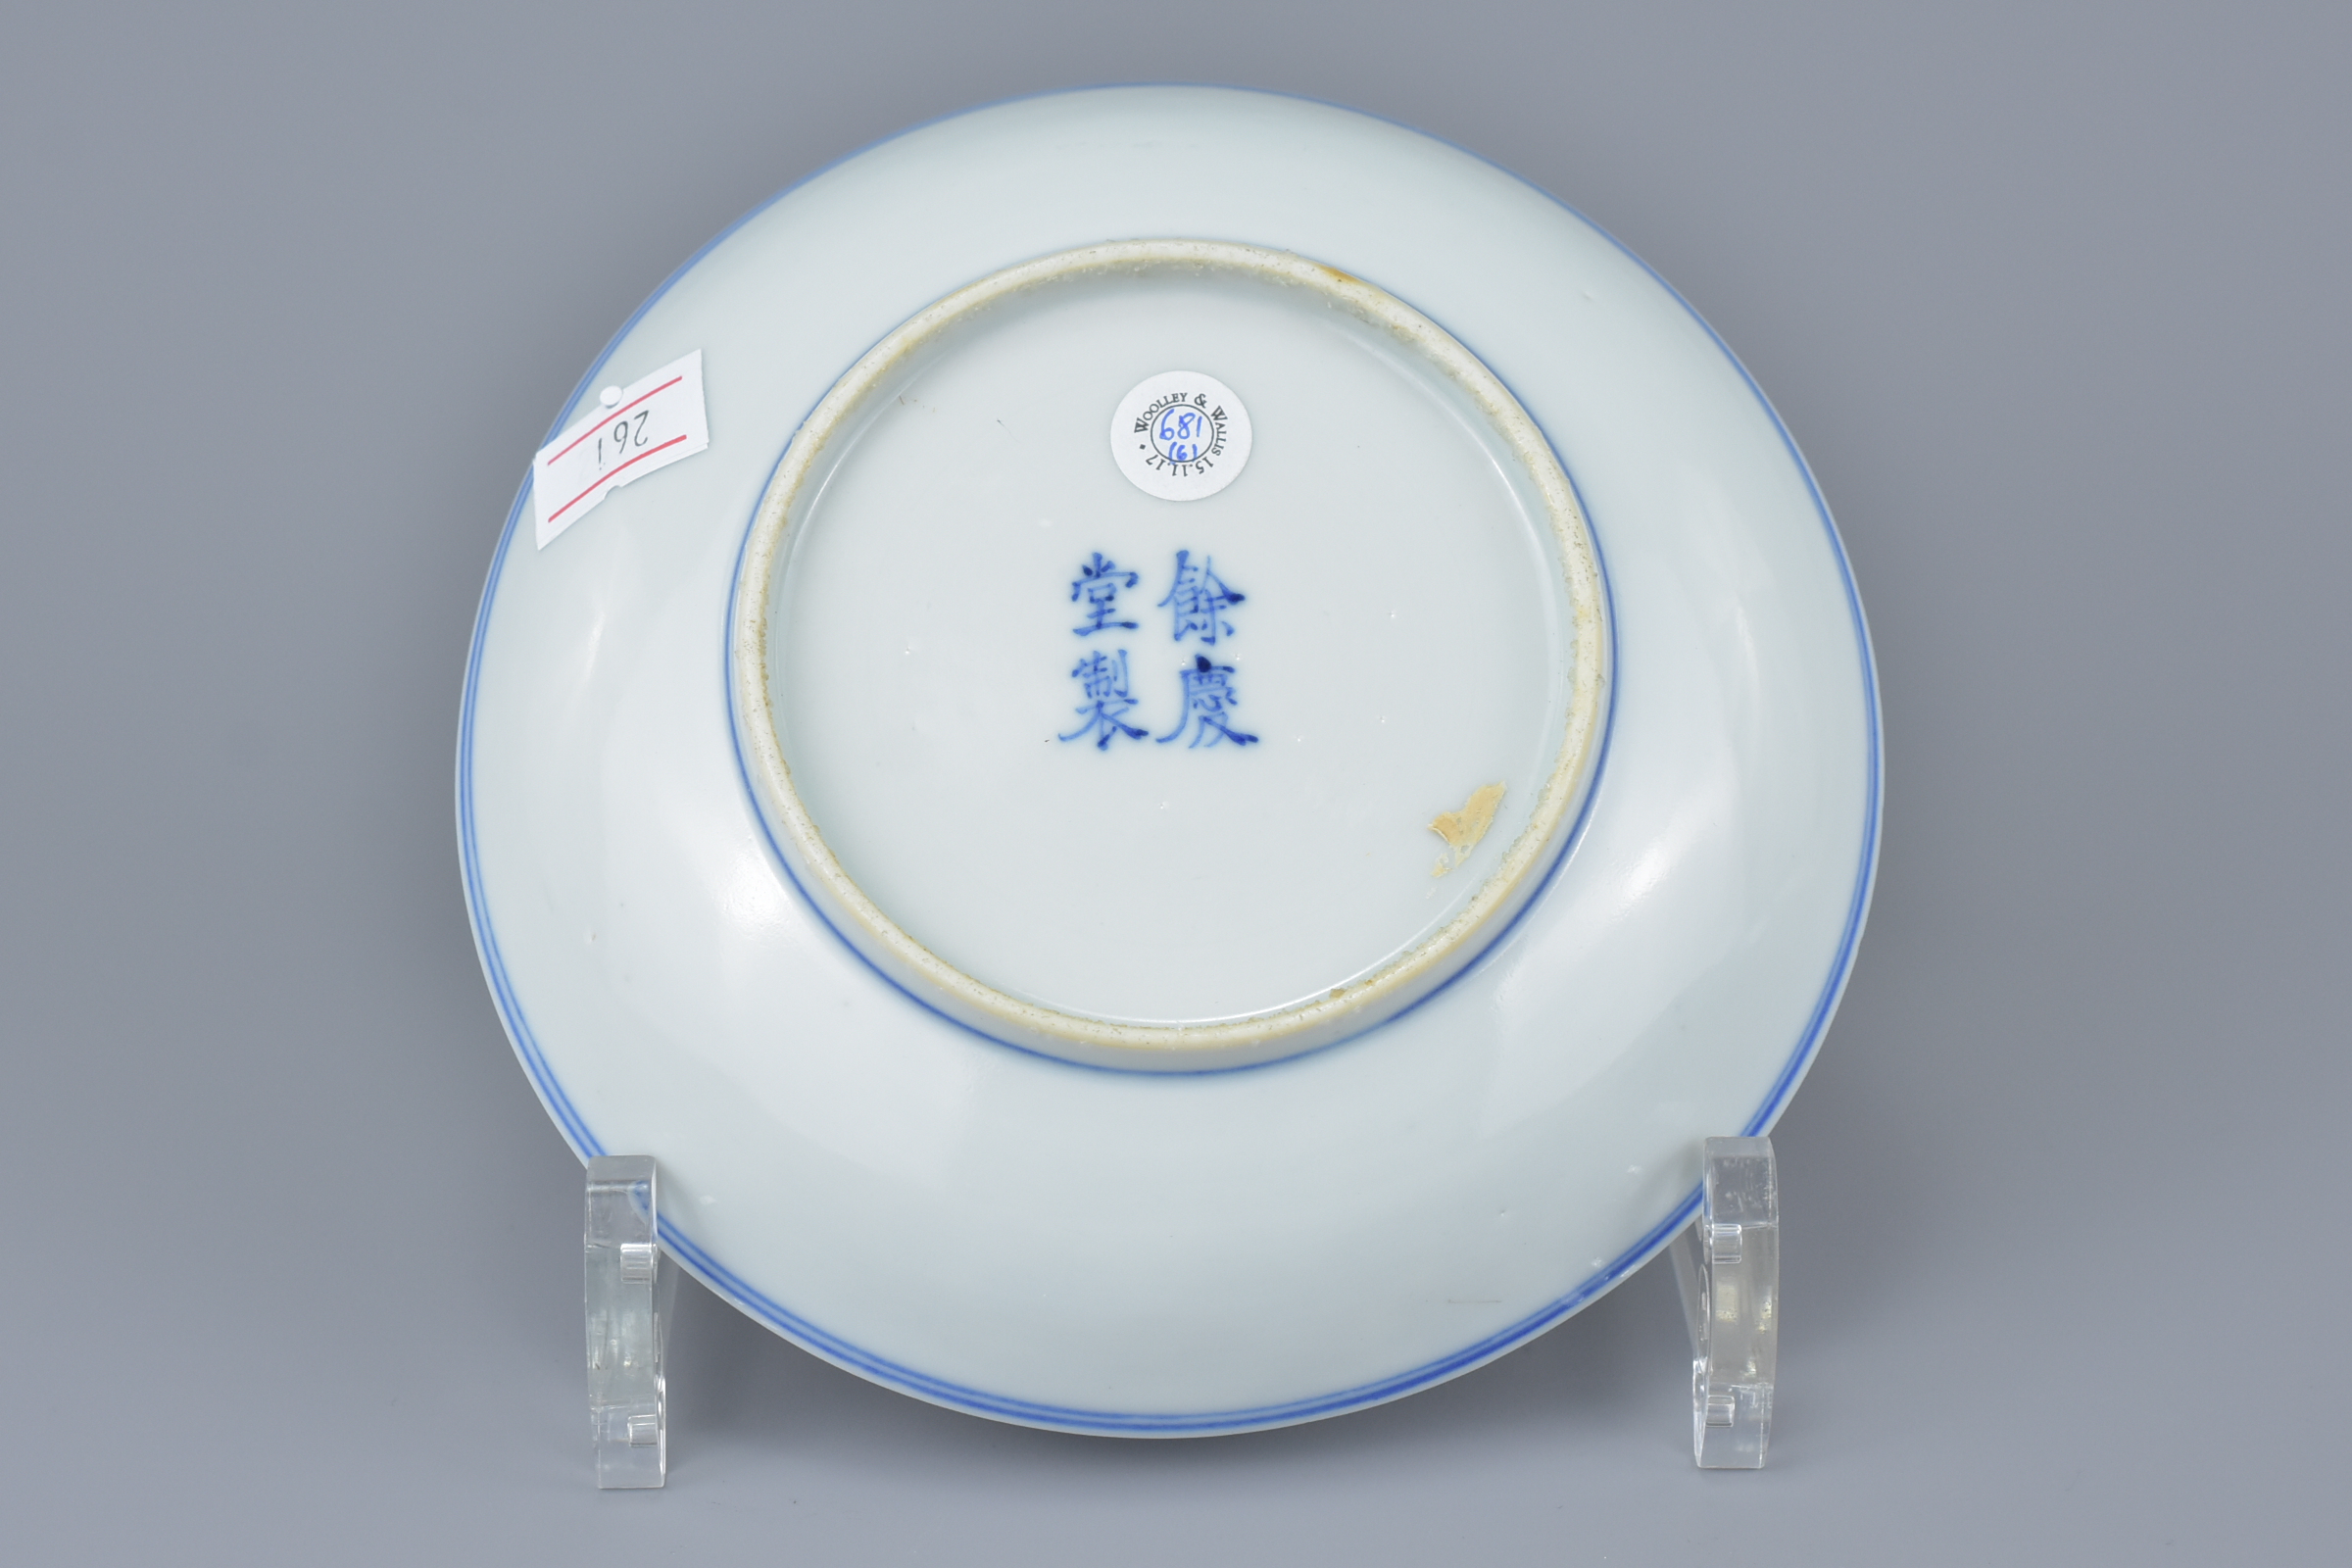 Pair of 19th century Chinese Porcelain Blue and White Saucers with four character hallmark and Wooll - Image 7 of 7